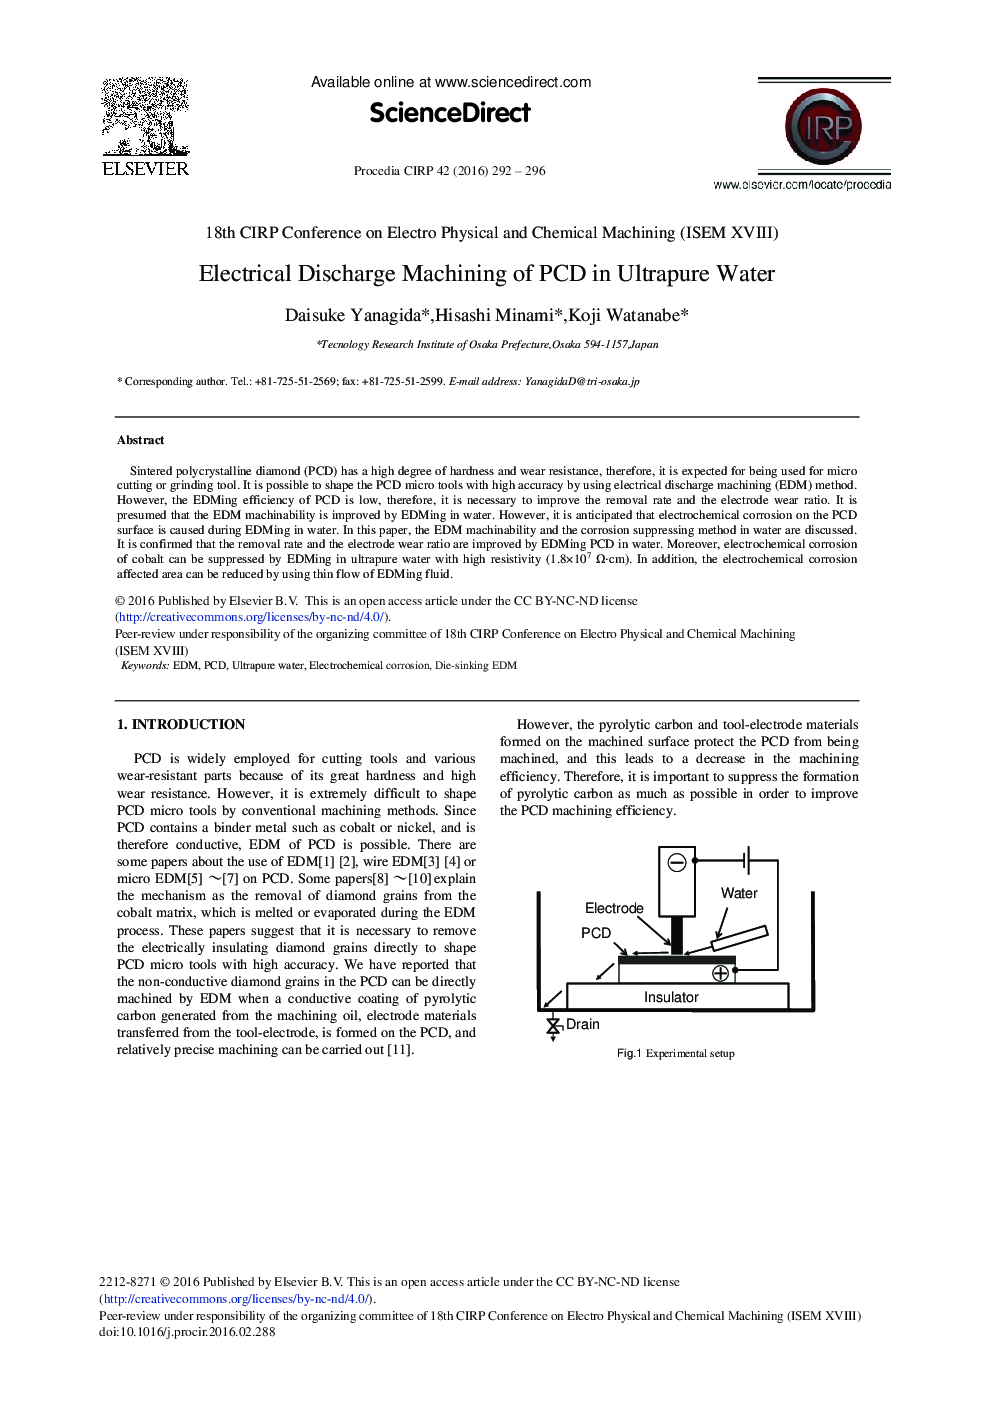 Electrical Discharge Machining of PCD in Ultrapure Water 